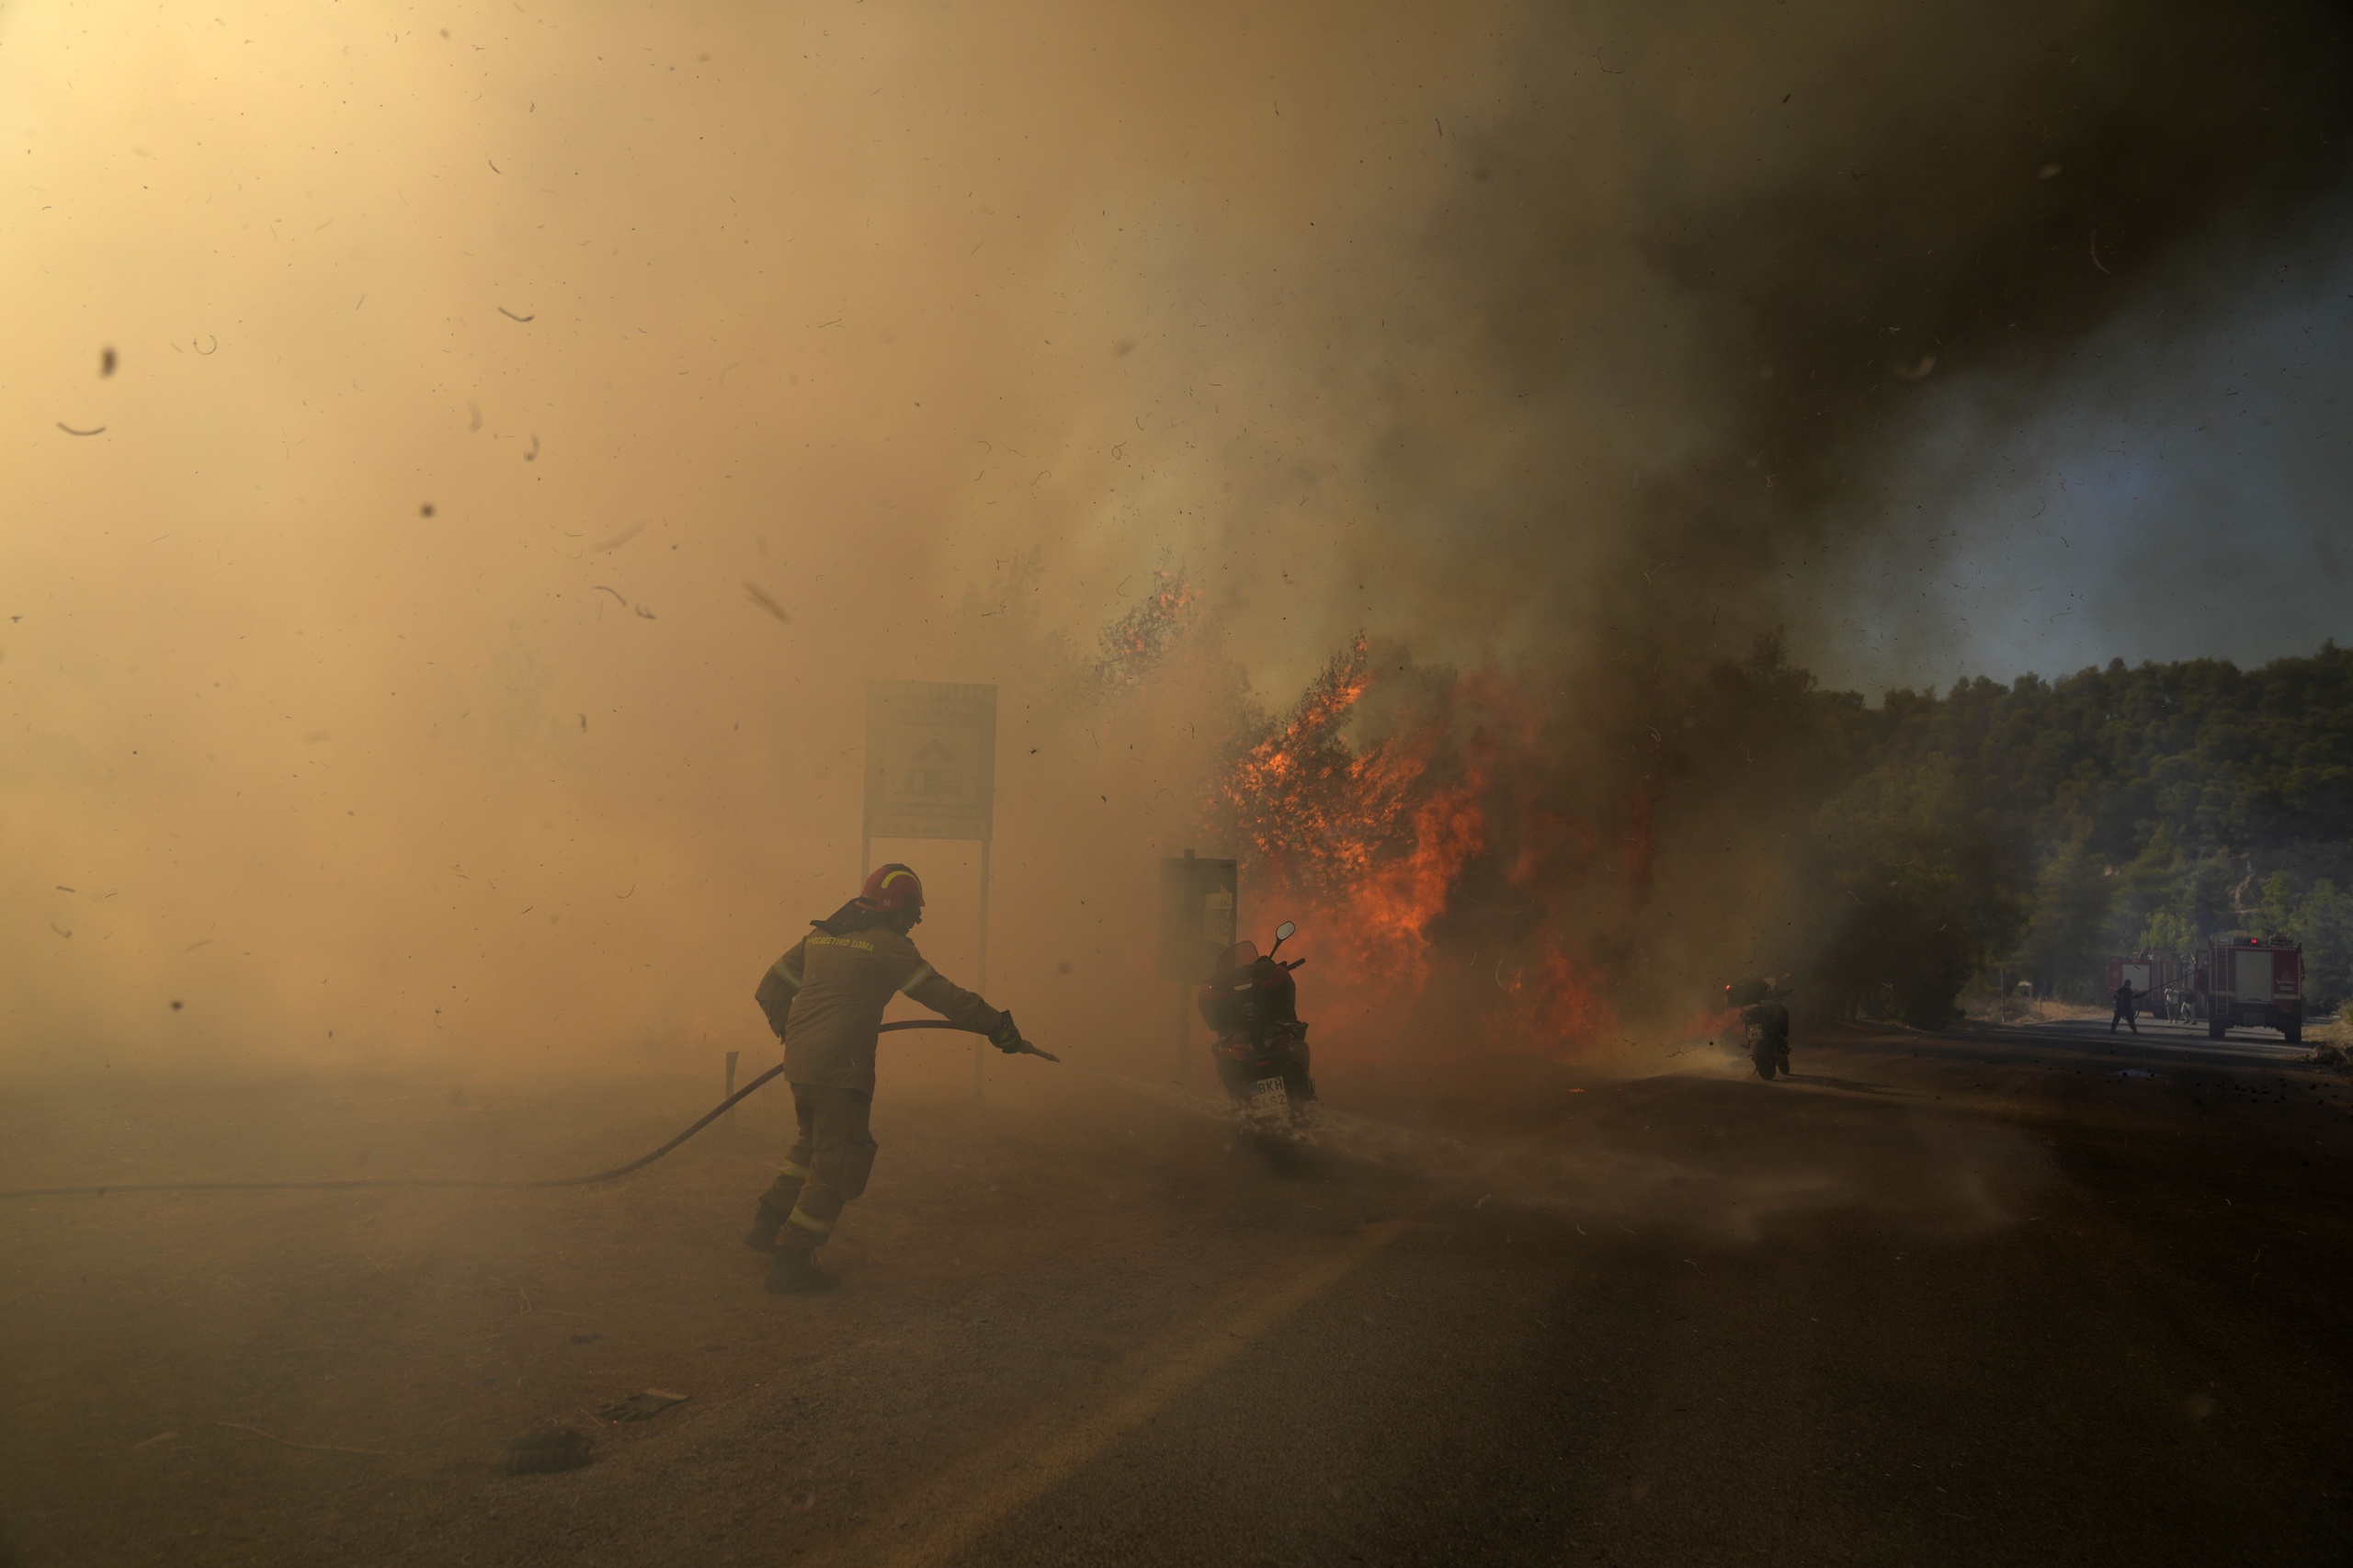 A firefighter tries to extinguish the flames next to motorcycles during a wildfire near Megara town, west of Athens, Greece, Wednesday, July 20, 2022. The new fire broke out in the hills outside the town of Megara, 40 kilometers (25 miles) to the west, prompting a new, but more limited, round of evacuations. (AP Photo/Petros Giannakouris)